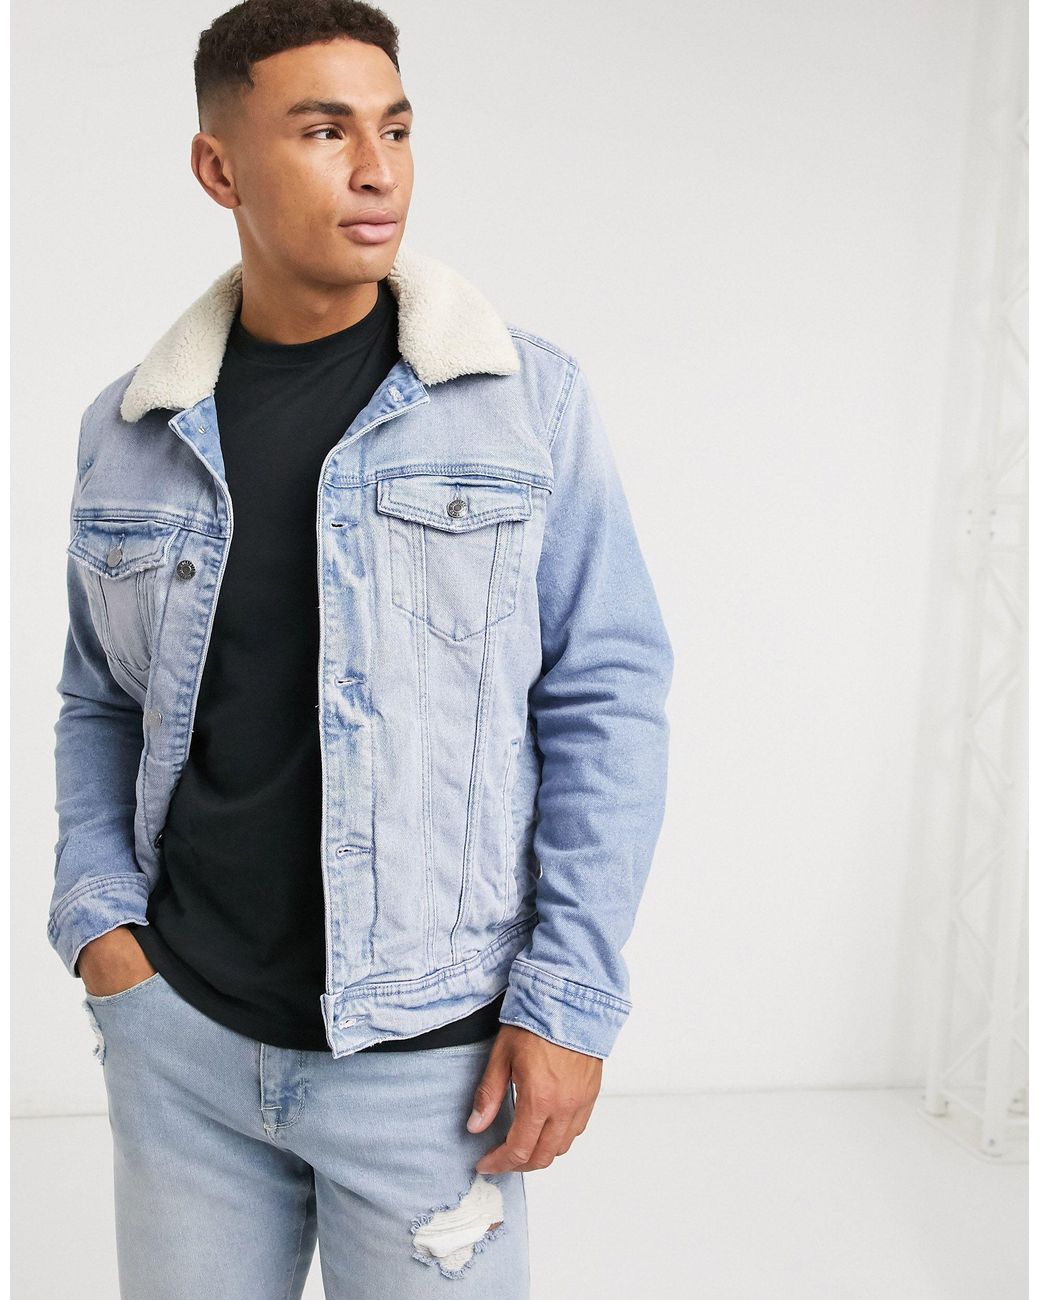 Mens Black Sherpa Denim Jacket With Charcoal Grey Fur at Rs 1699 | New  Items in Greater Noida | ID: 23281508691